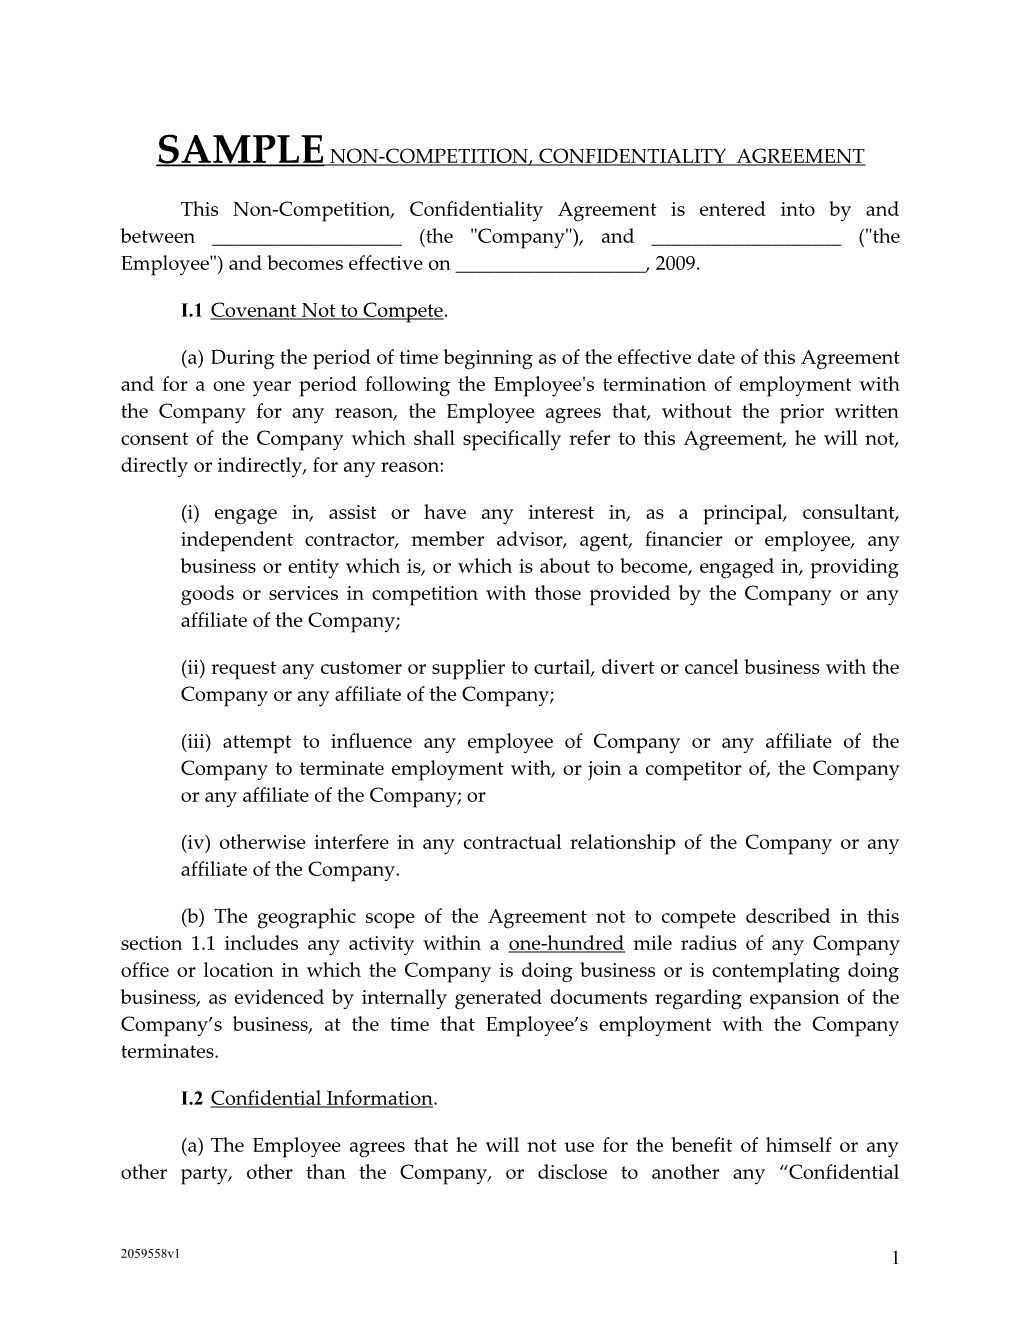 Samplenon-Competition, Confidentiality Agreement